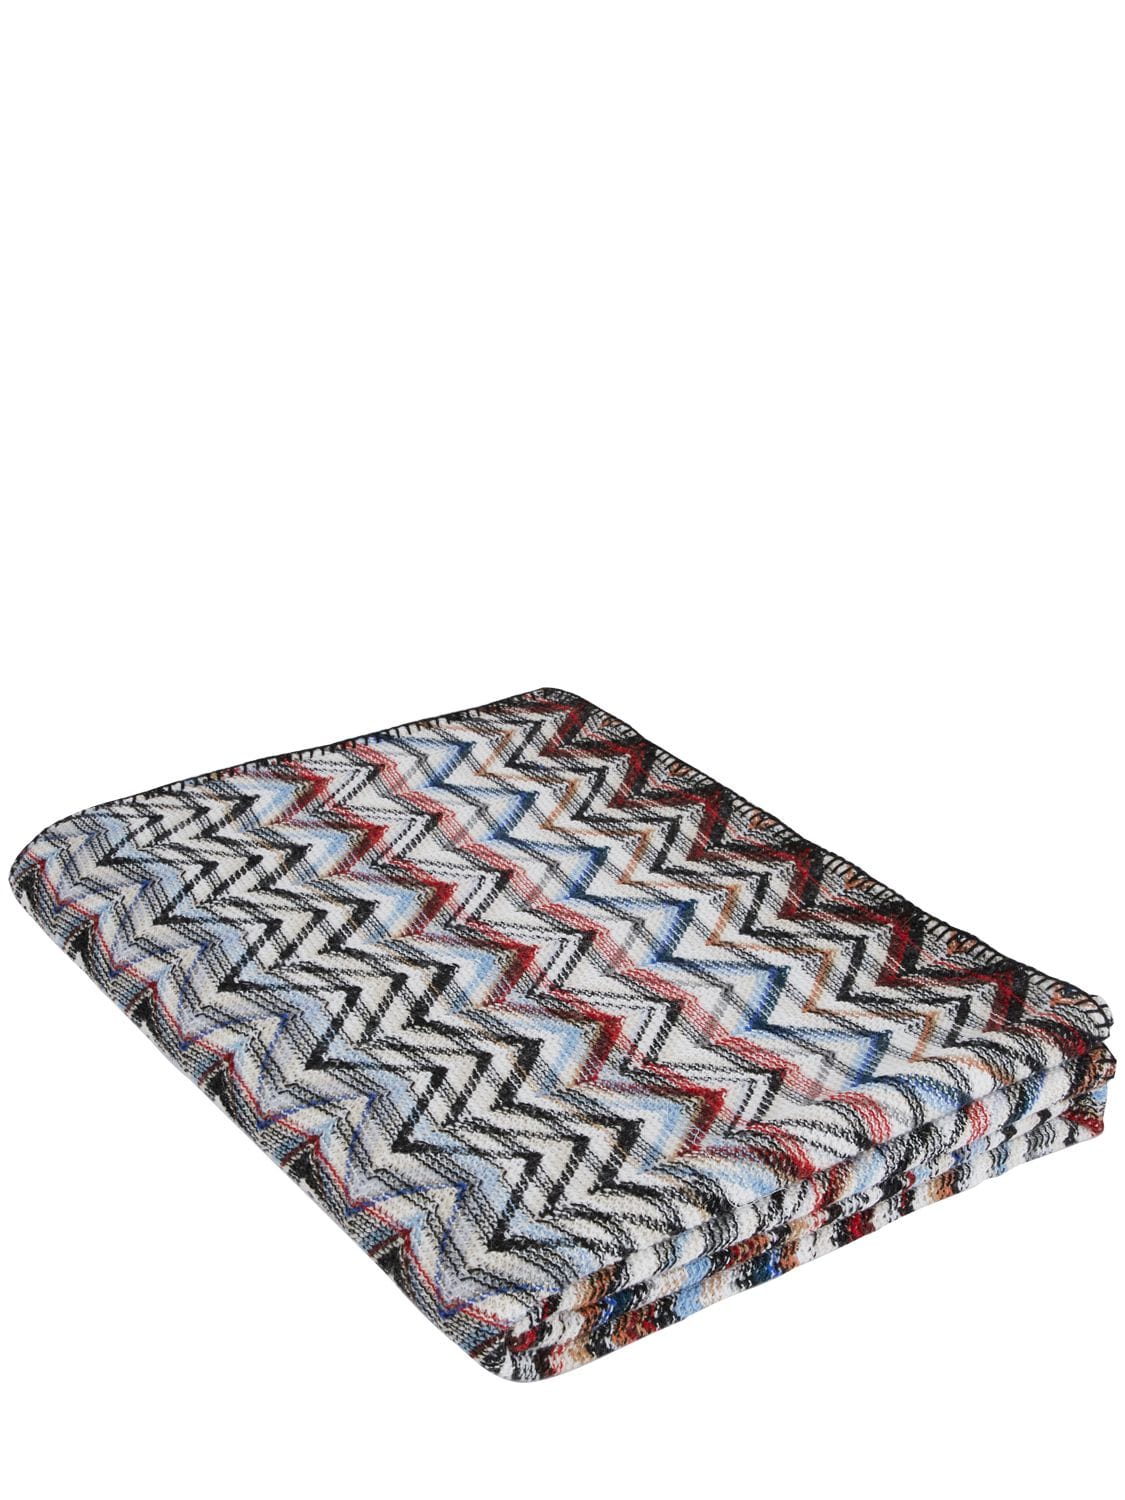 Missoni Home Collection Denver Throw In Multicolor